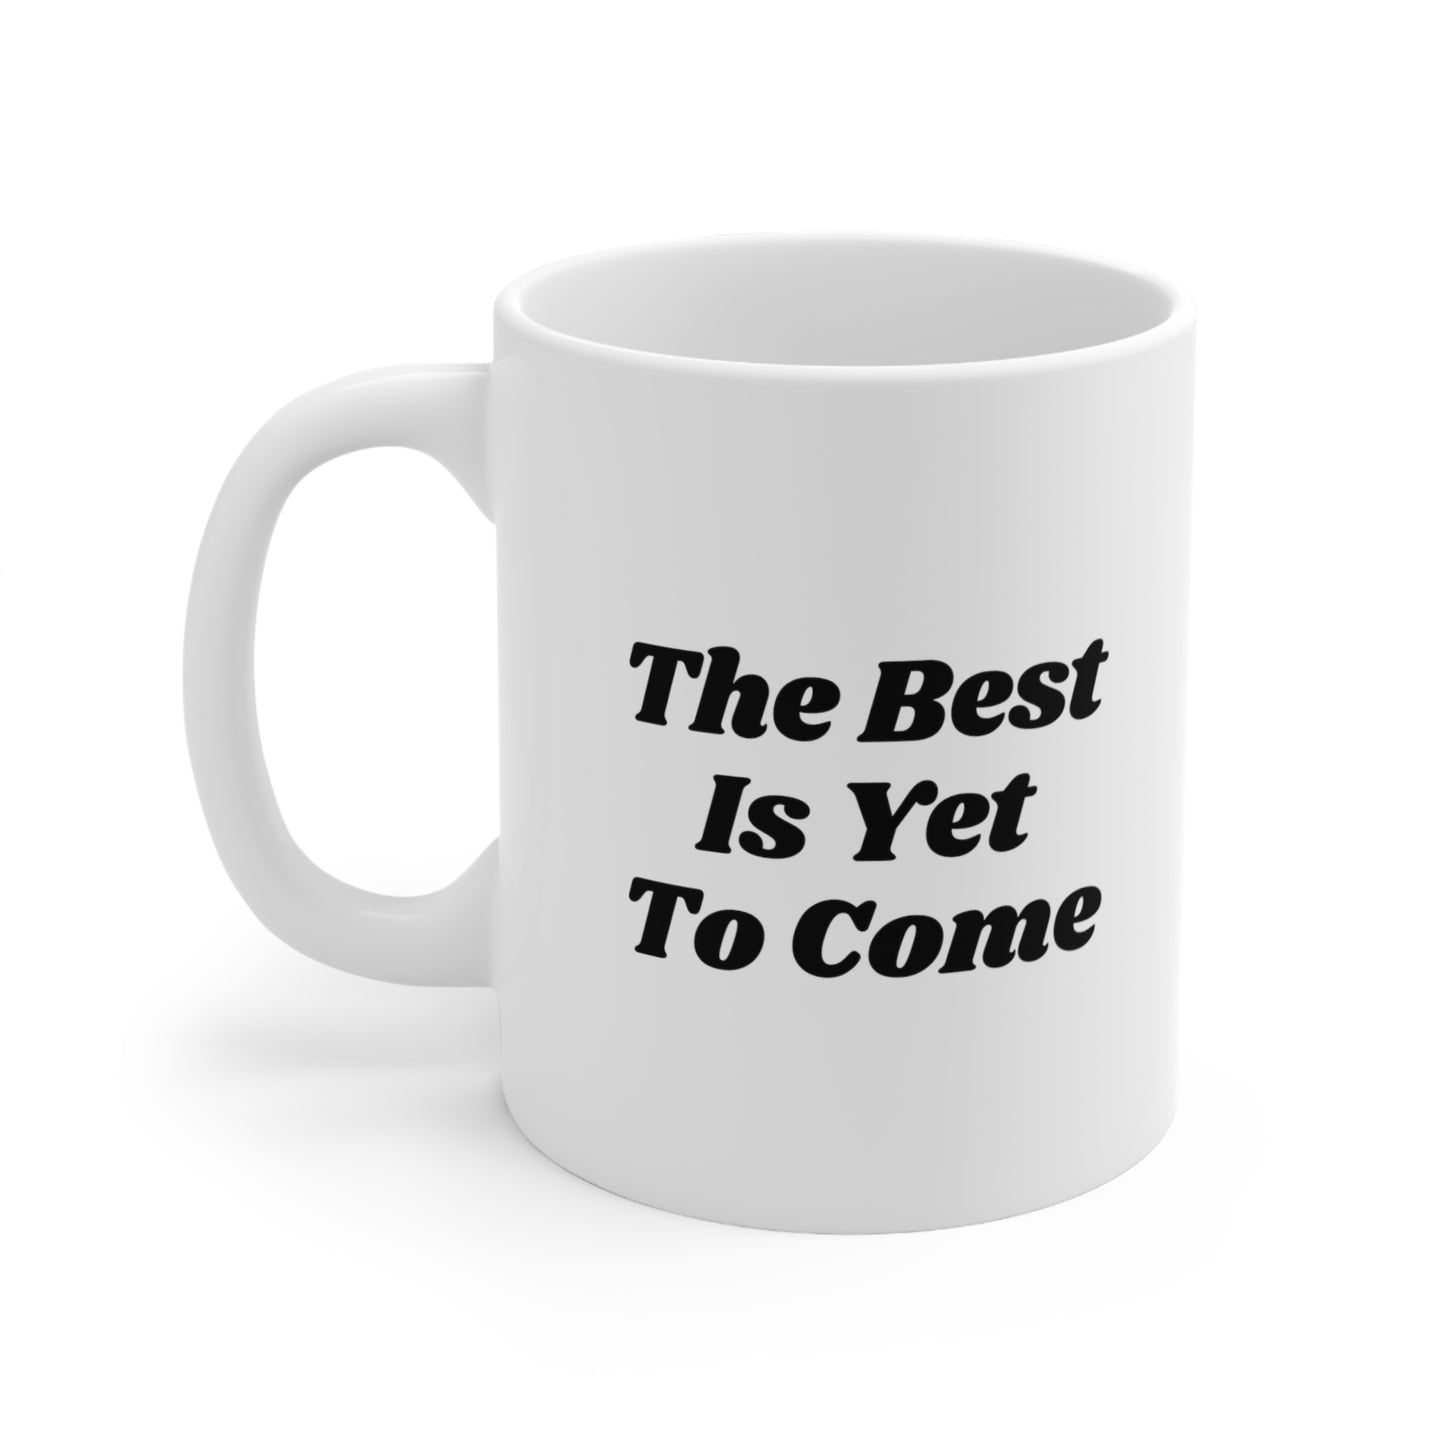 The Best Is Yet To Come Coffee Mug